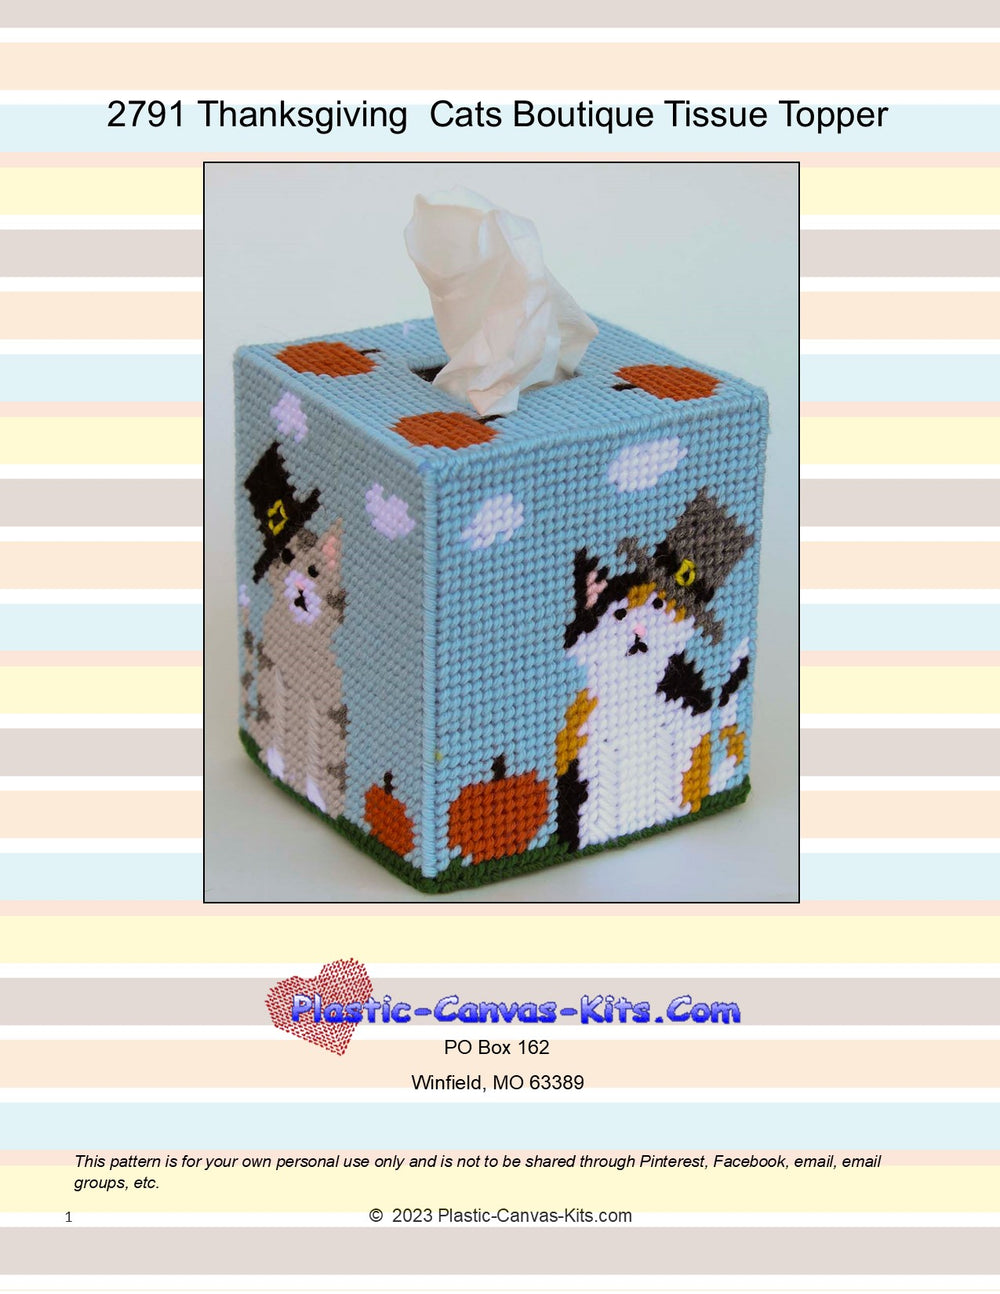 Thanksgiving Cats Boutique Tissue Topper